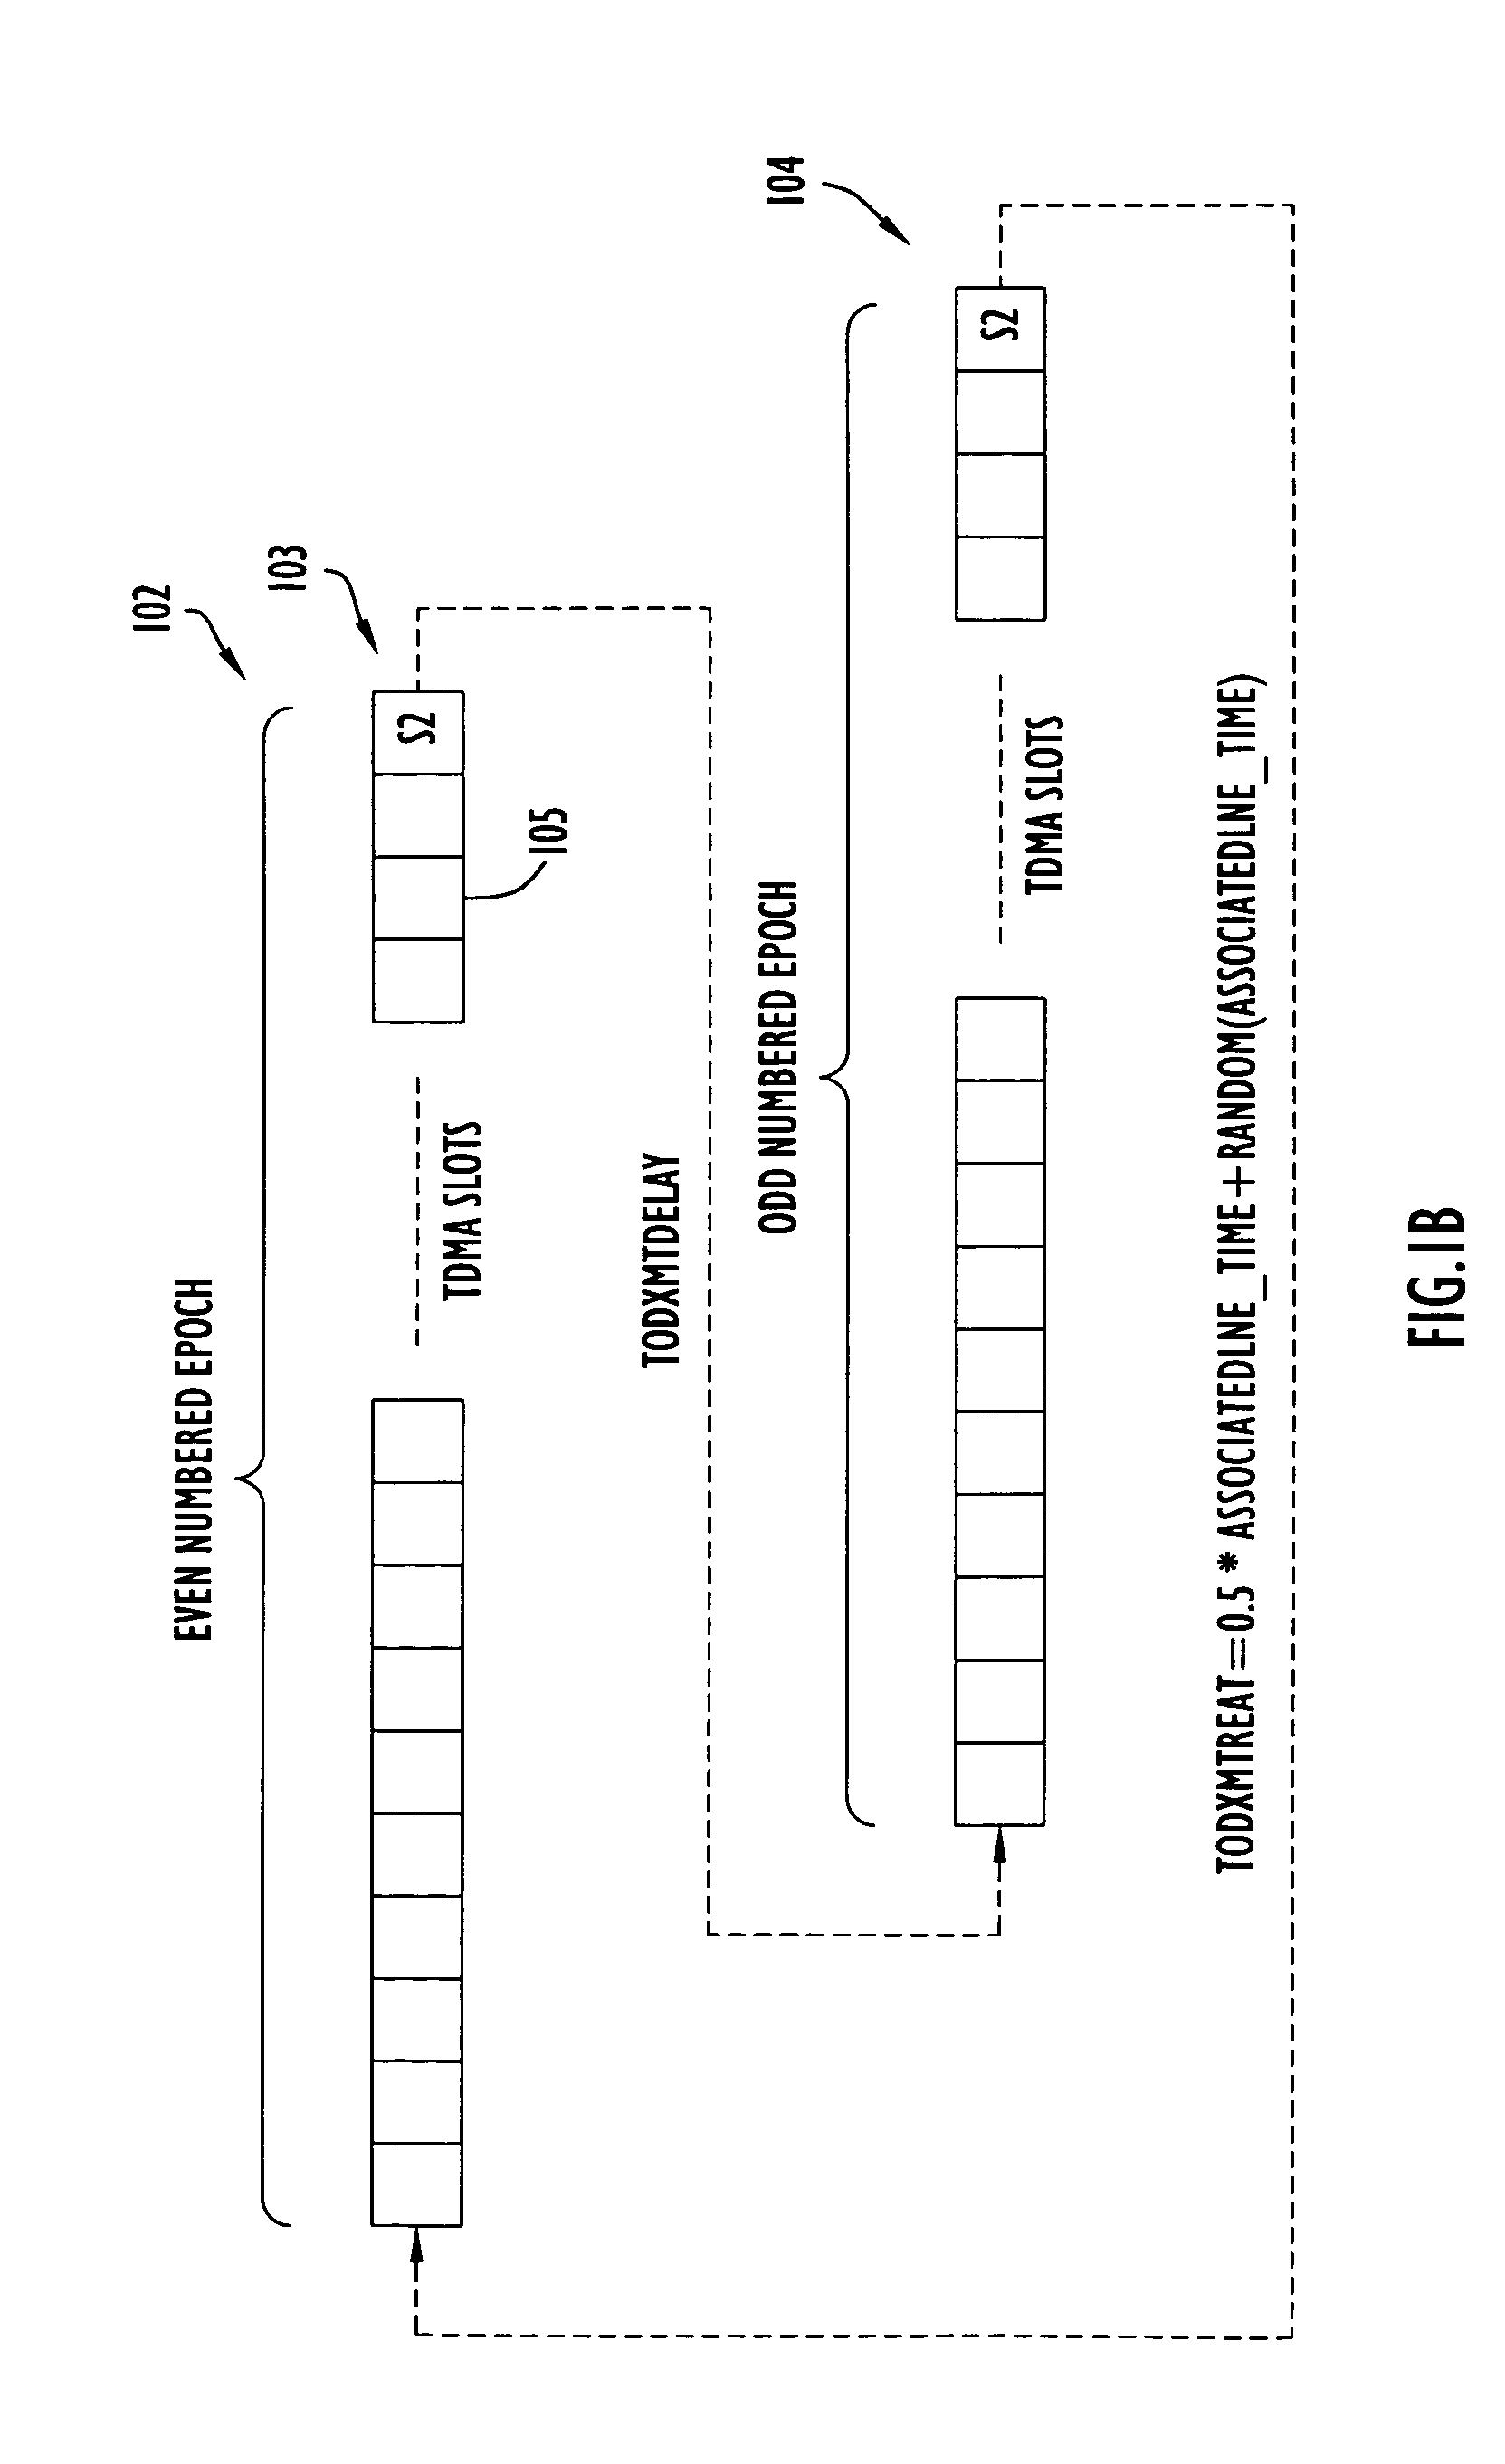 Method and apparatus for time-of-day synchronization between network nodes